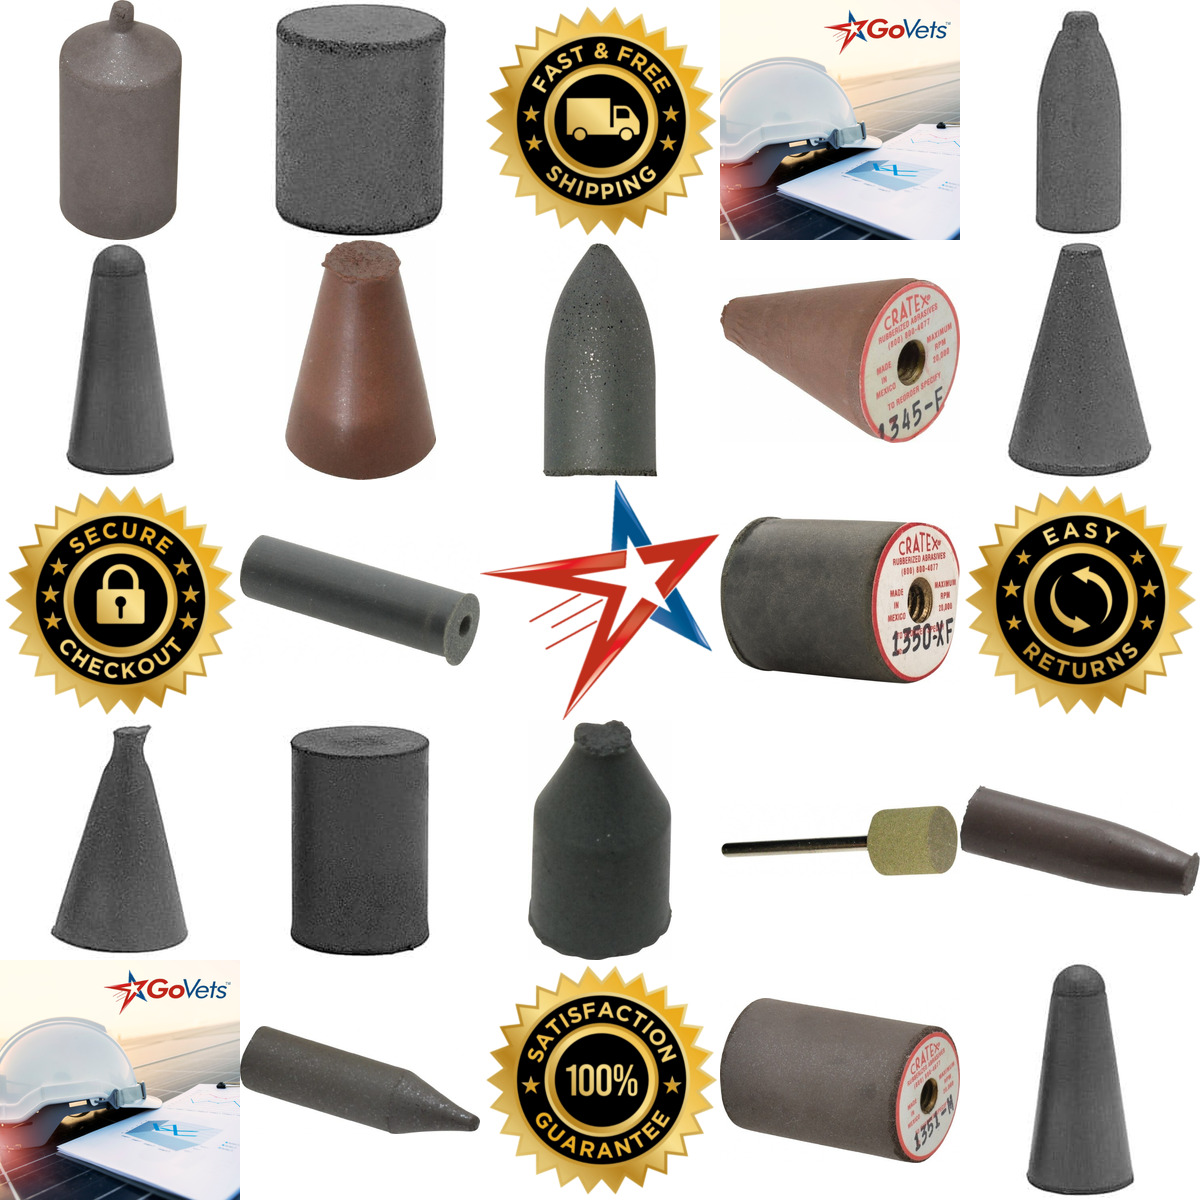 A selection of Rubberized Points products on GoVets